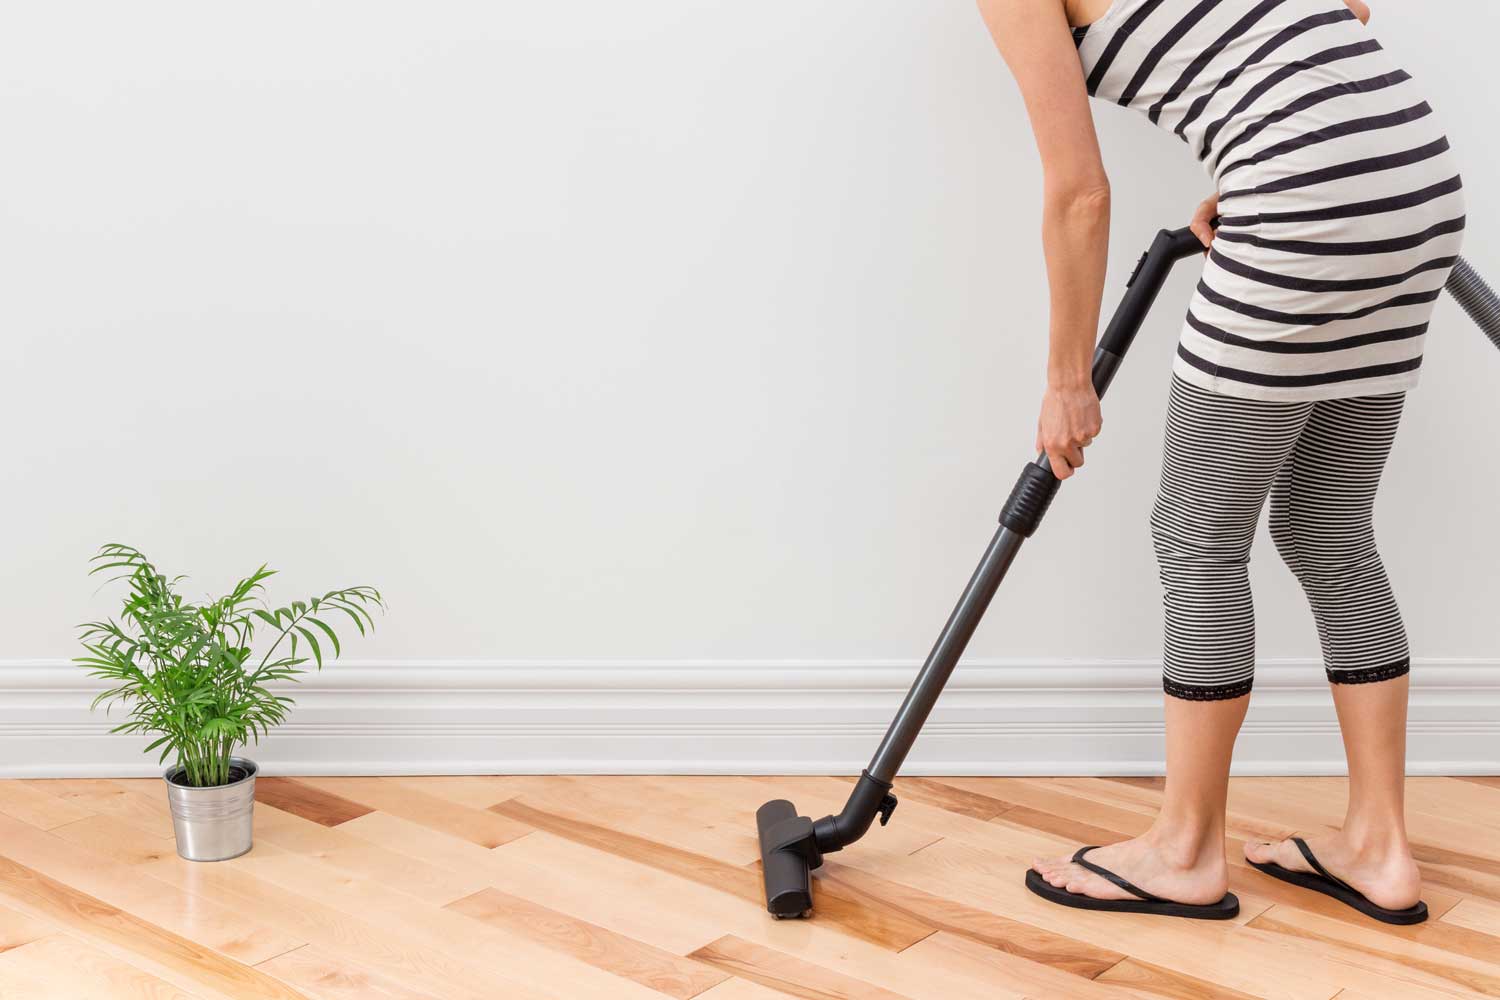 Regulary vacuum or sweep floors to remove dirt and keep your home floors looking amazing - tips from Footprints Floors in Humble.